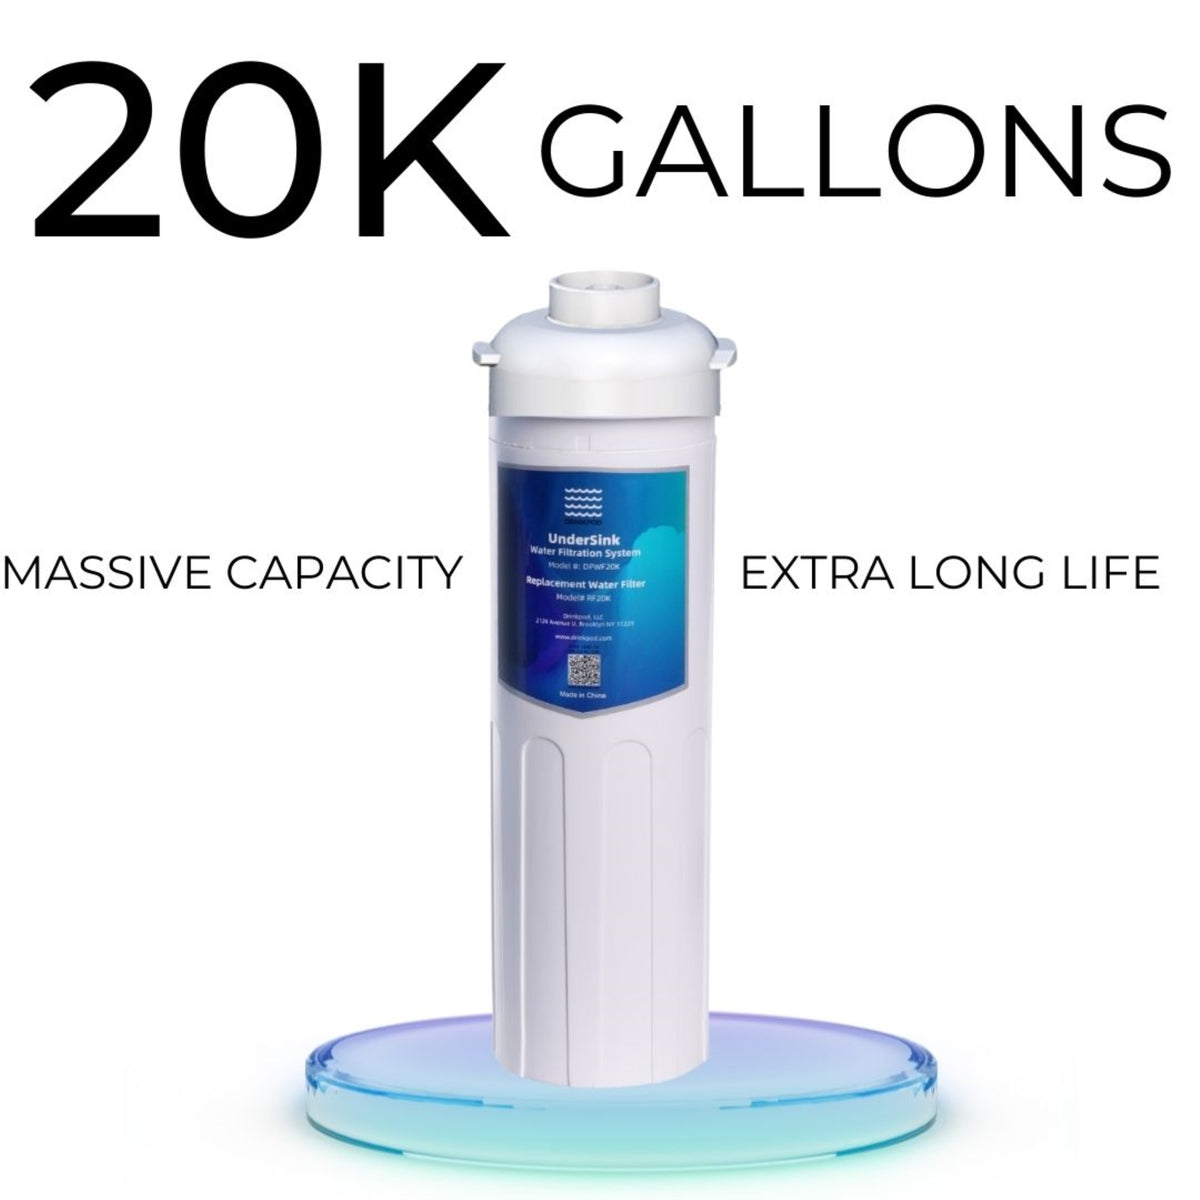 20,000 Gallon Replacement Water Filter For Under Sink Filtration System